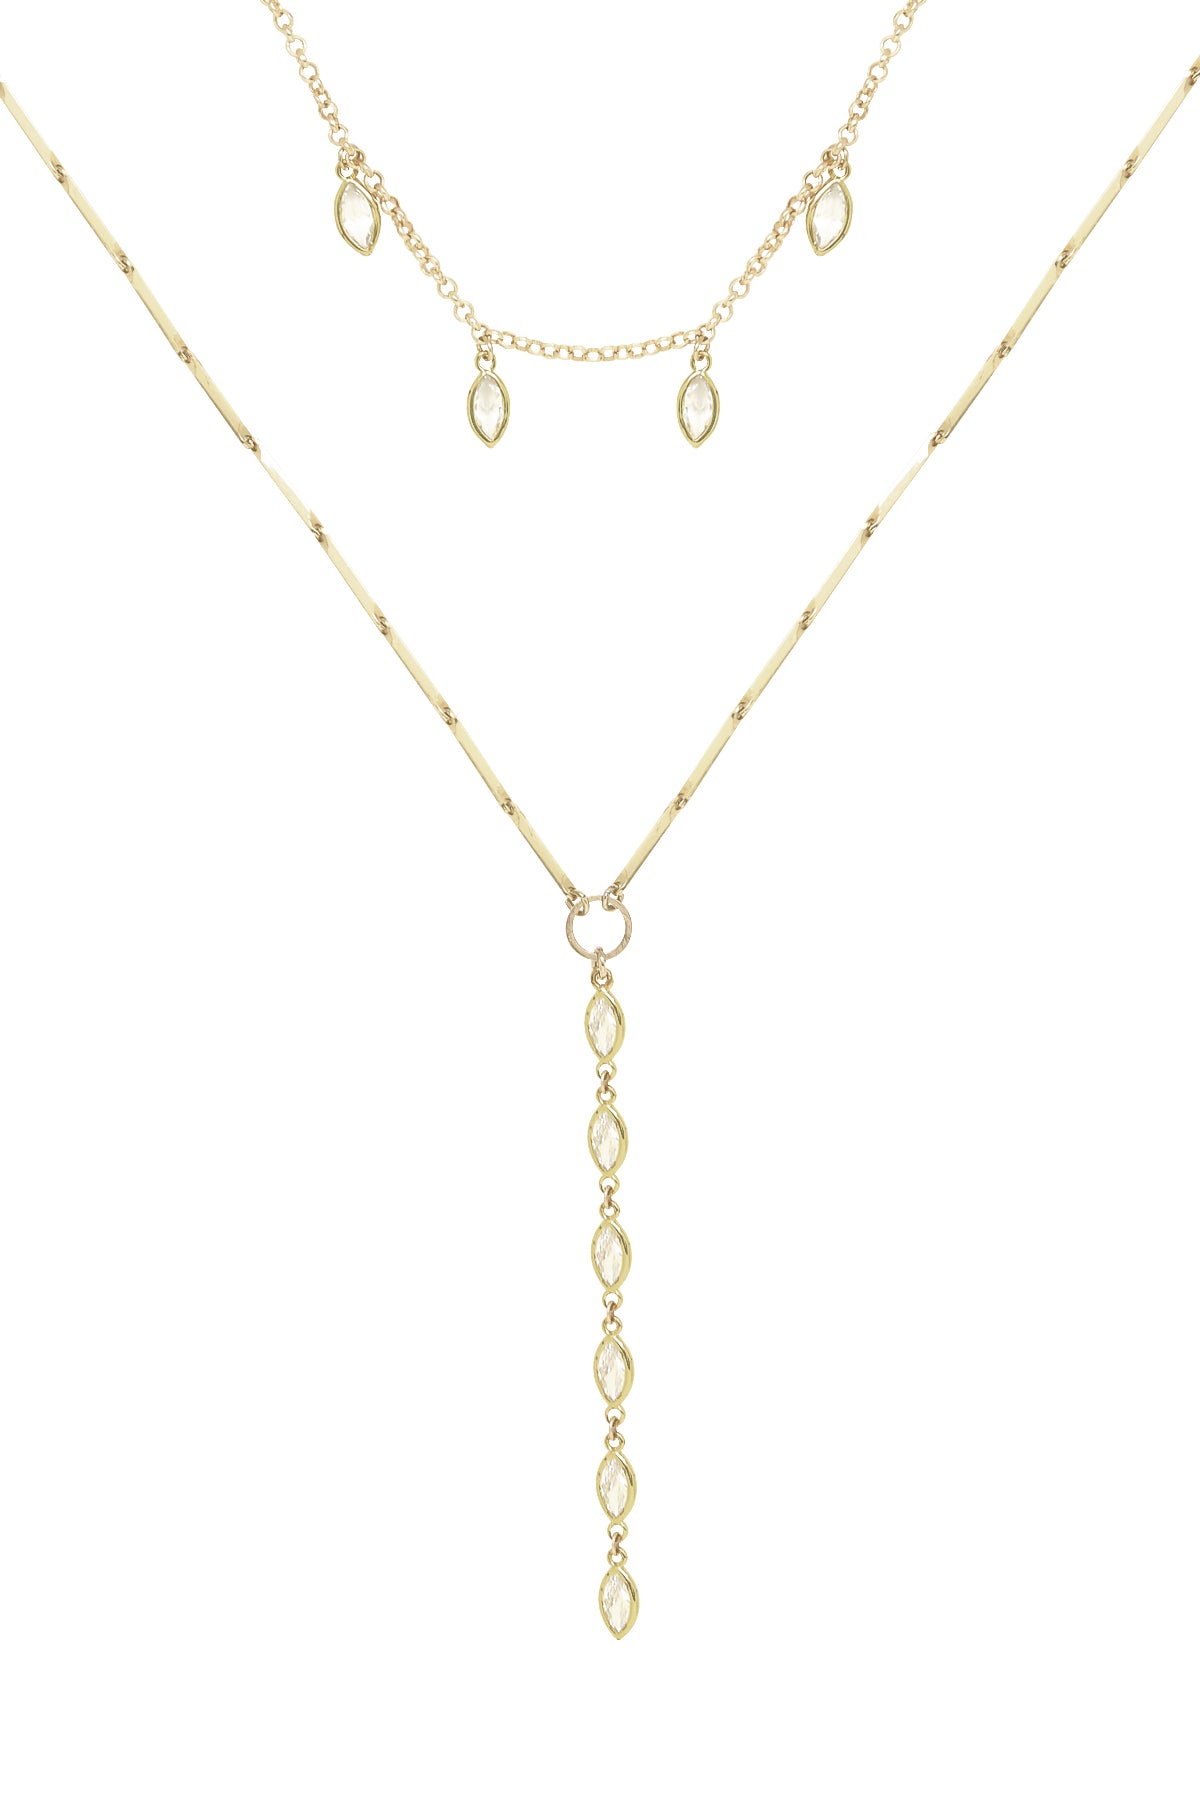 Ariella Glass Crystal 18k Gold Plated Layered Lariat Necklace on white background  